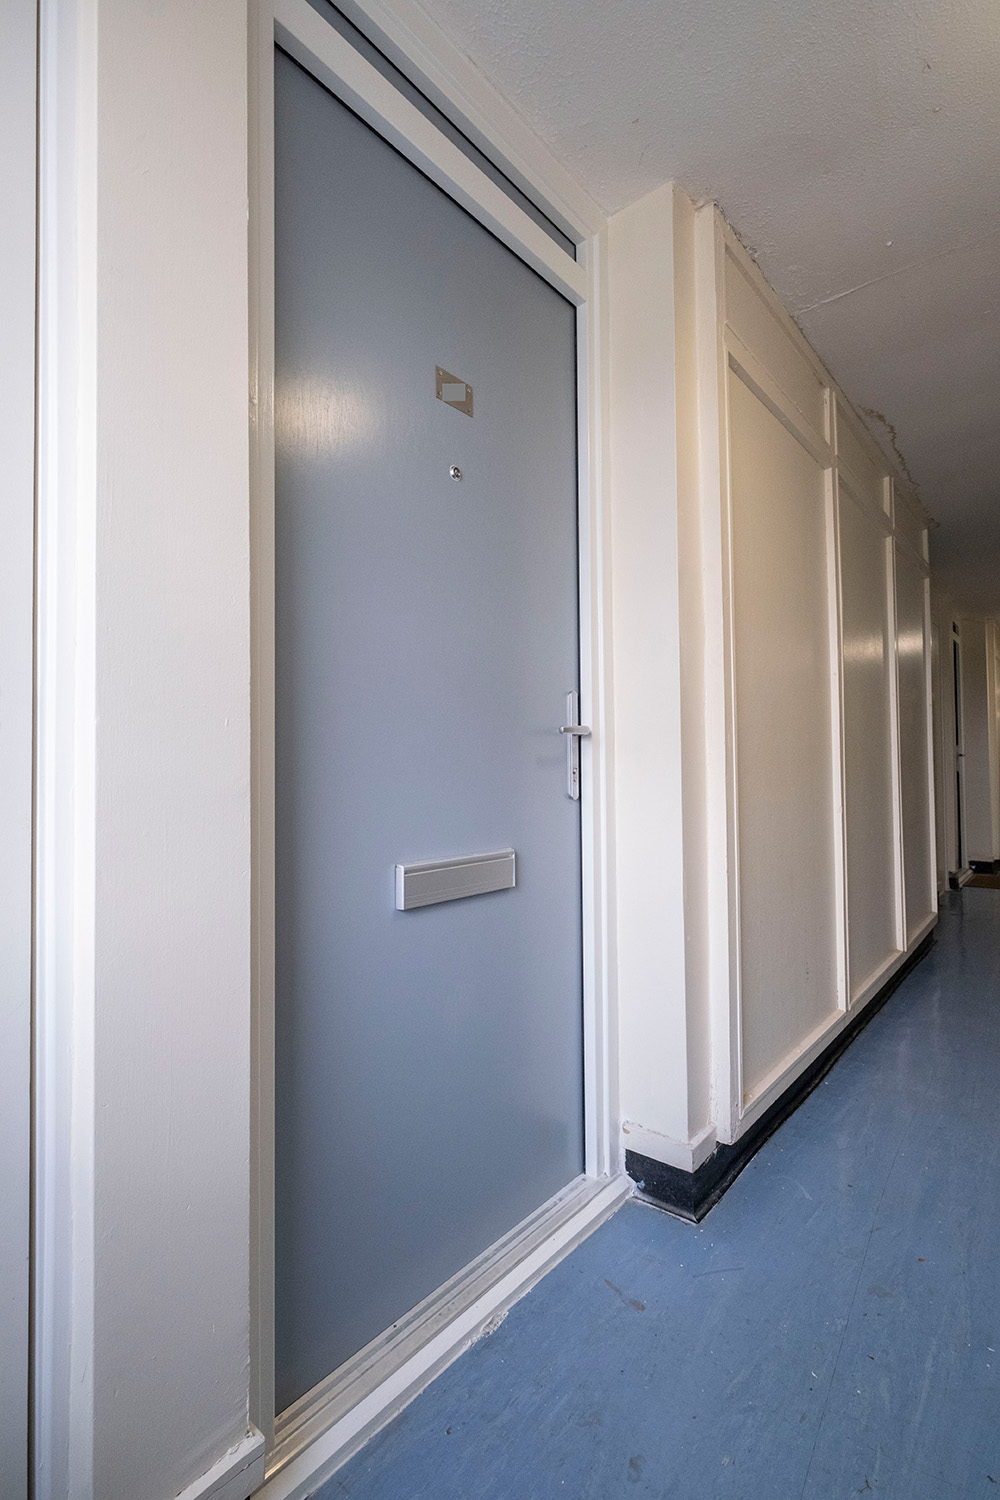 CCG delivers new fire doors for Cambuslang tower block